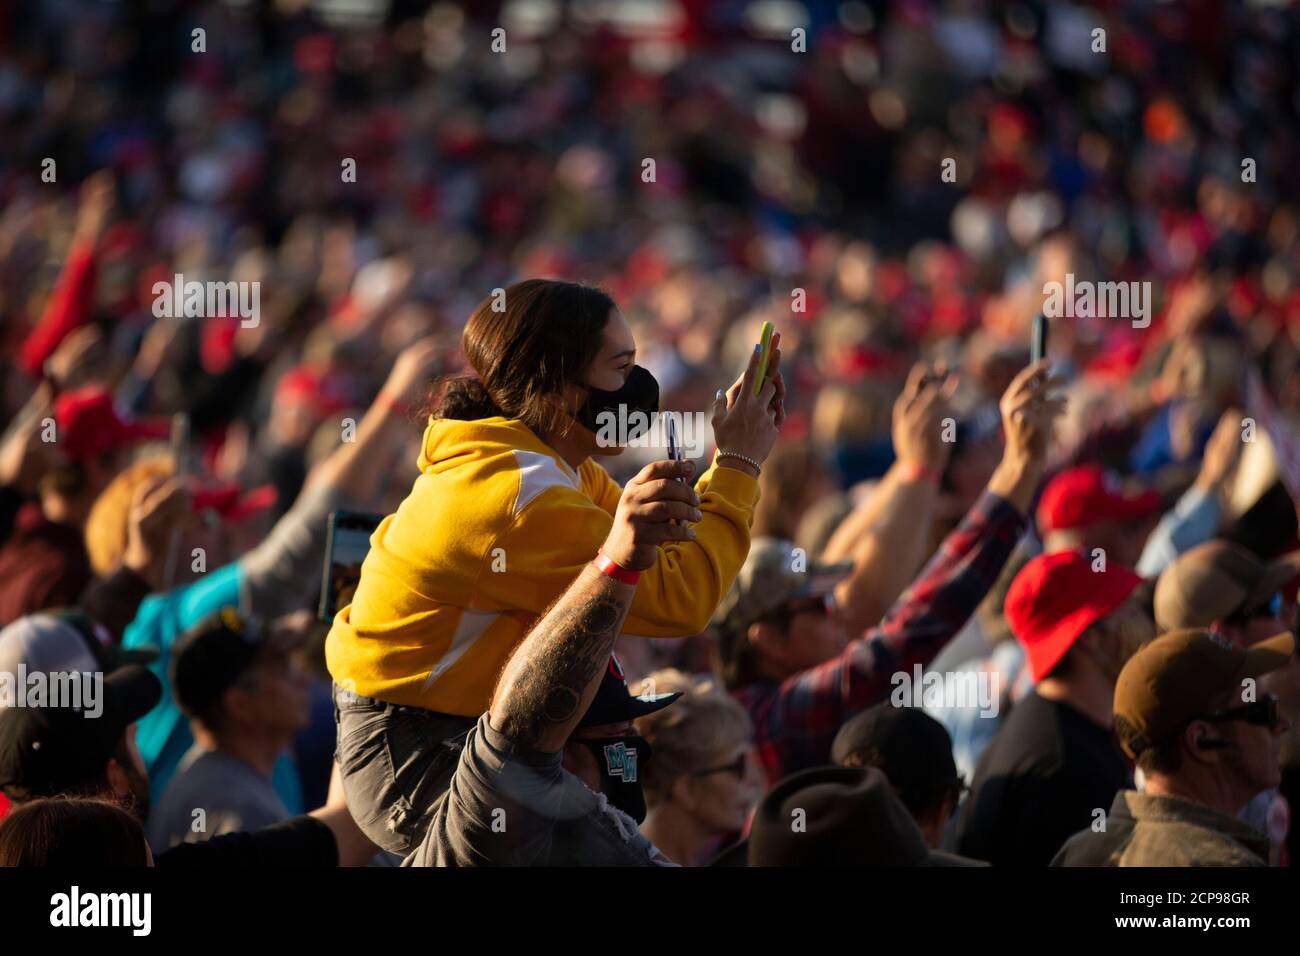 Bemidji, Minnesota, USA. 18th Sep, 2020. September 18, 2020: A girl on the shoulders of her father uses her phone to document Air Force One landing at Bemidji Regional Airport on Sep 18, 2020. Credit: Chris Juhn/ZUMA Wire/Alamy Live News Credit: ZUMA Press, Inc./Alamy Live News Stock Photo